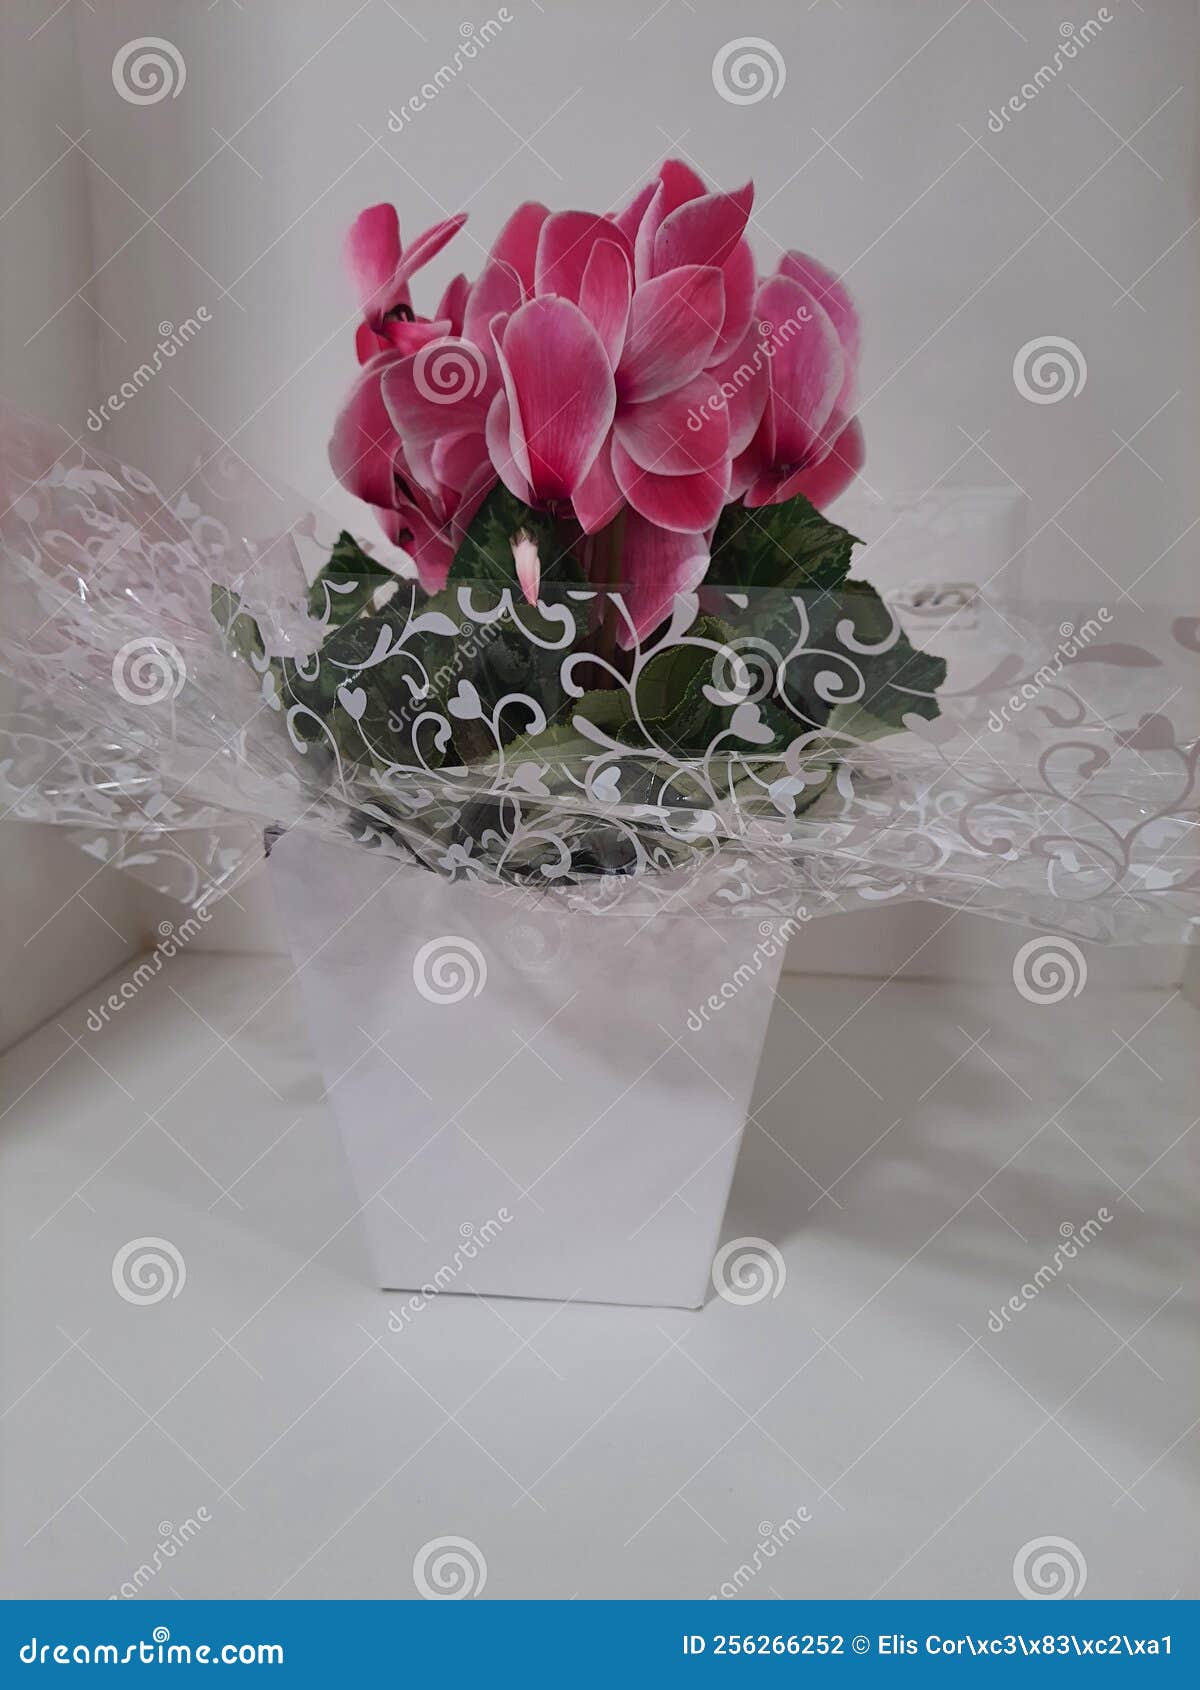 pink cyclamen persicum, in a gift-wrapped vase, .